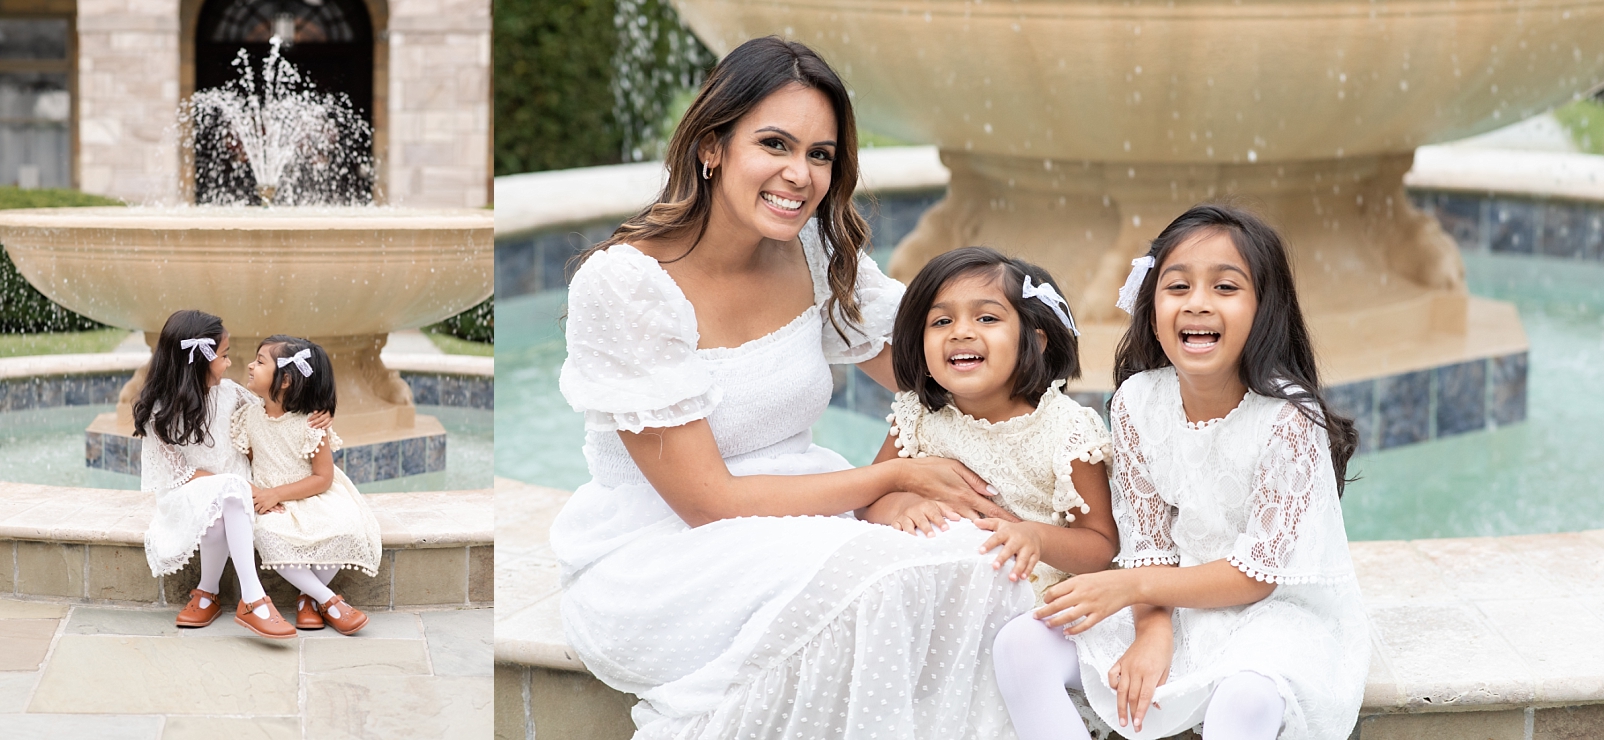 a mom and her daughters wearing white dresses and standing in a white stone archway